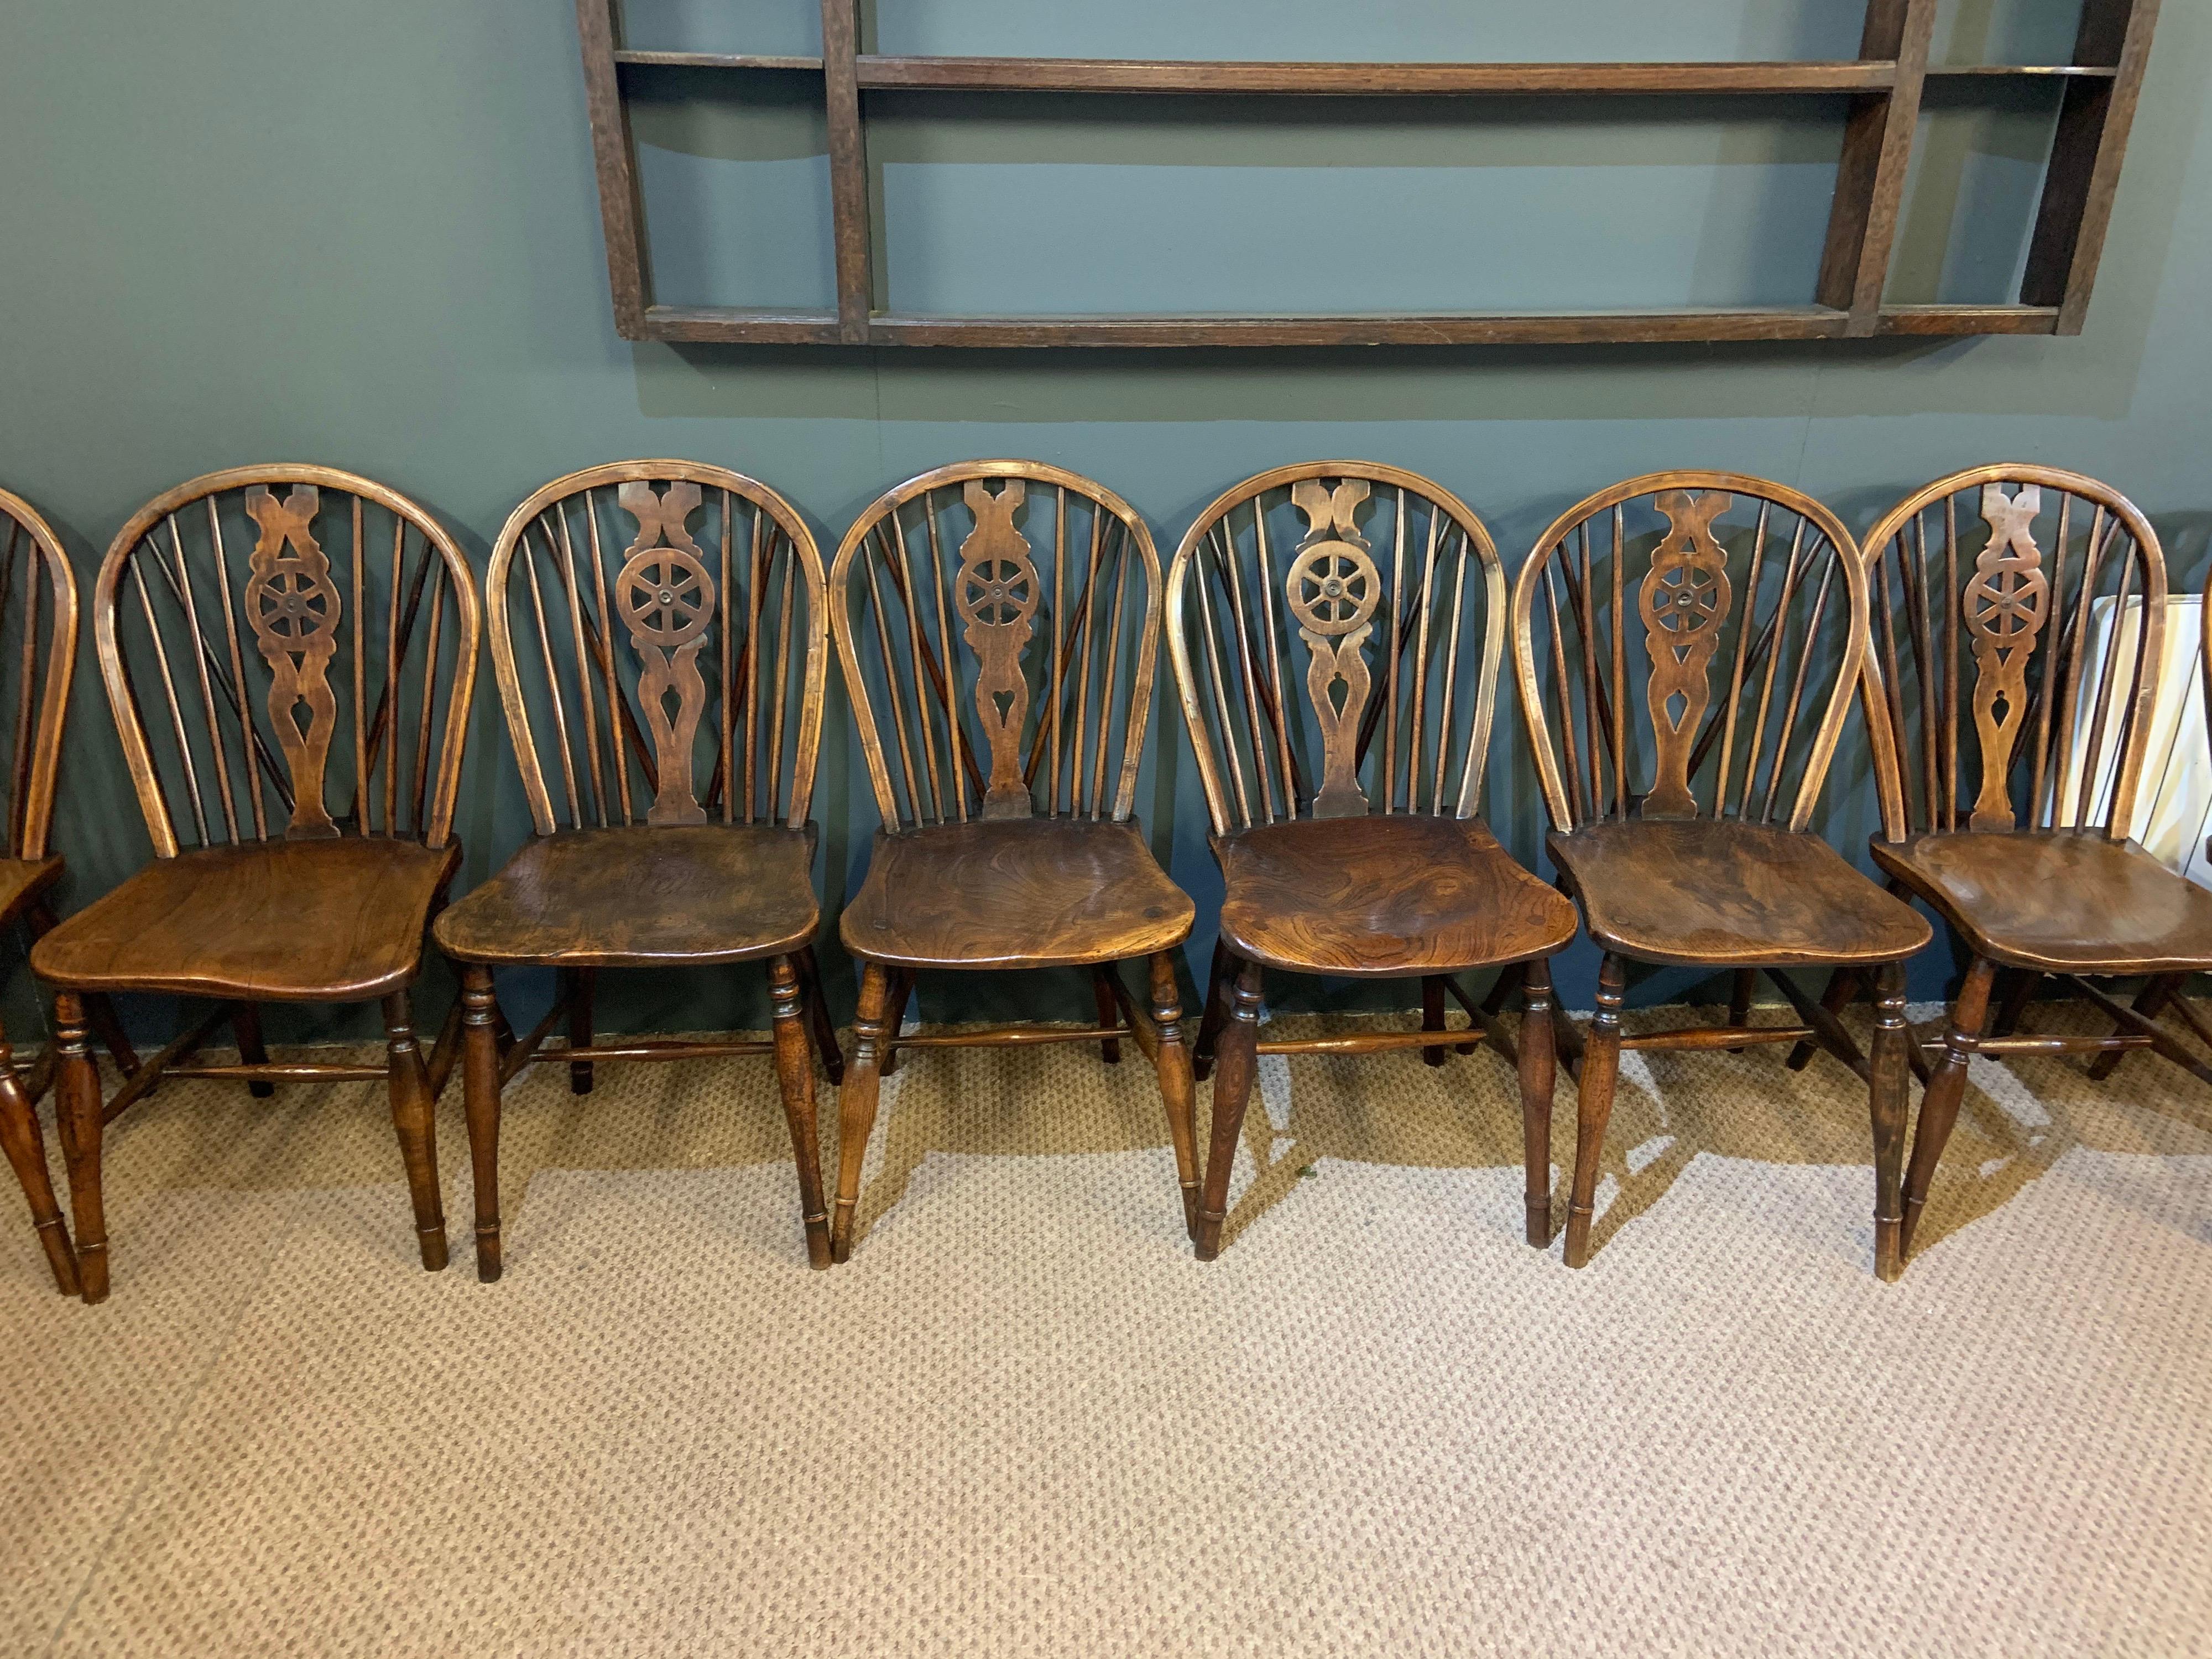 Early 19th century Windsor wheel back chairs in excellent condition and wonderful color and patination. Lovely large seats and all very comfortable.